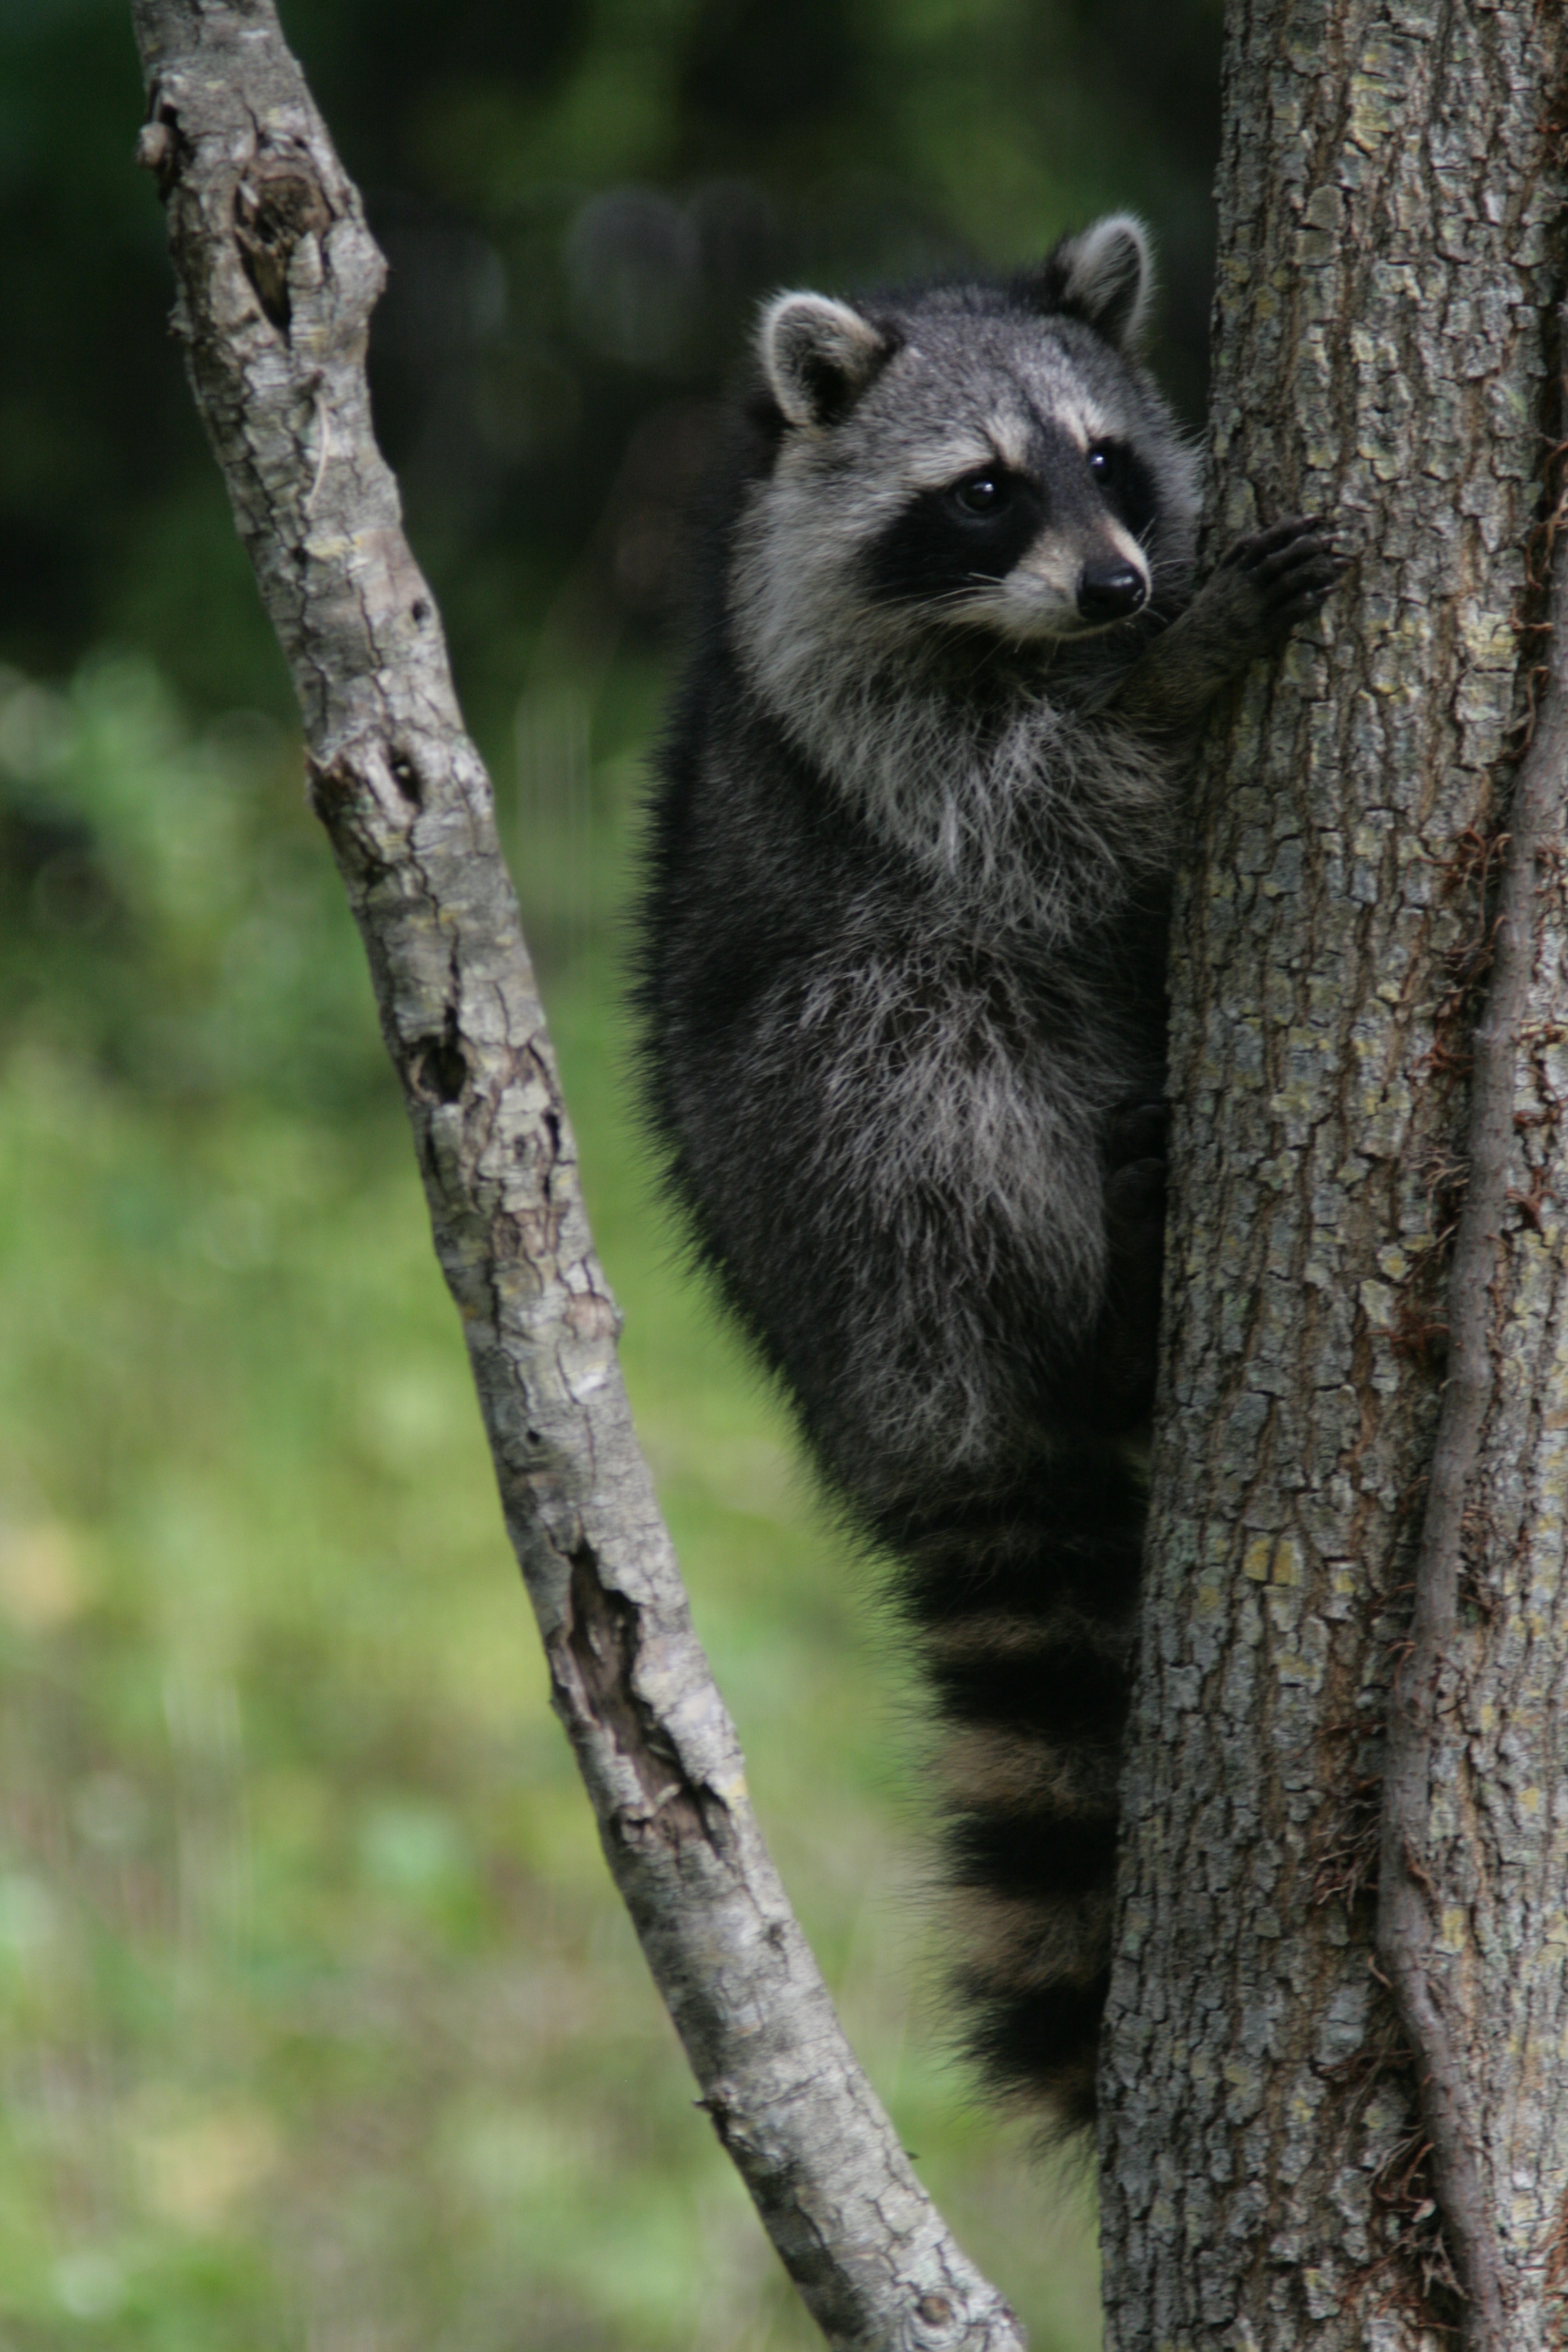 Racoon clinging to a tree